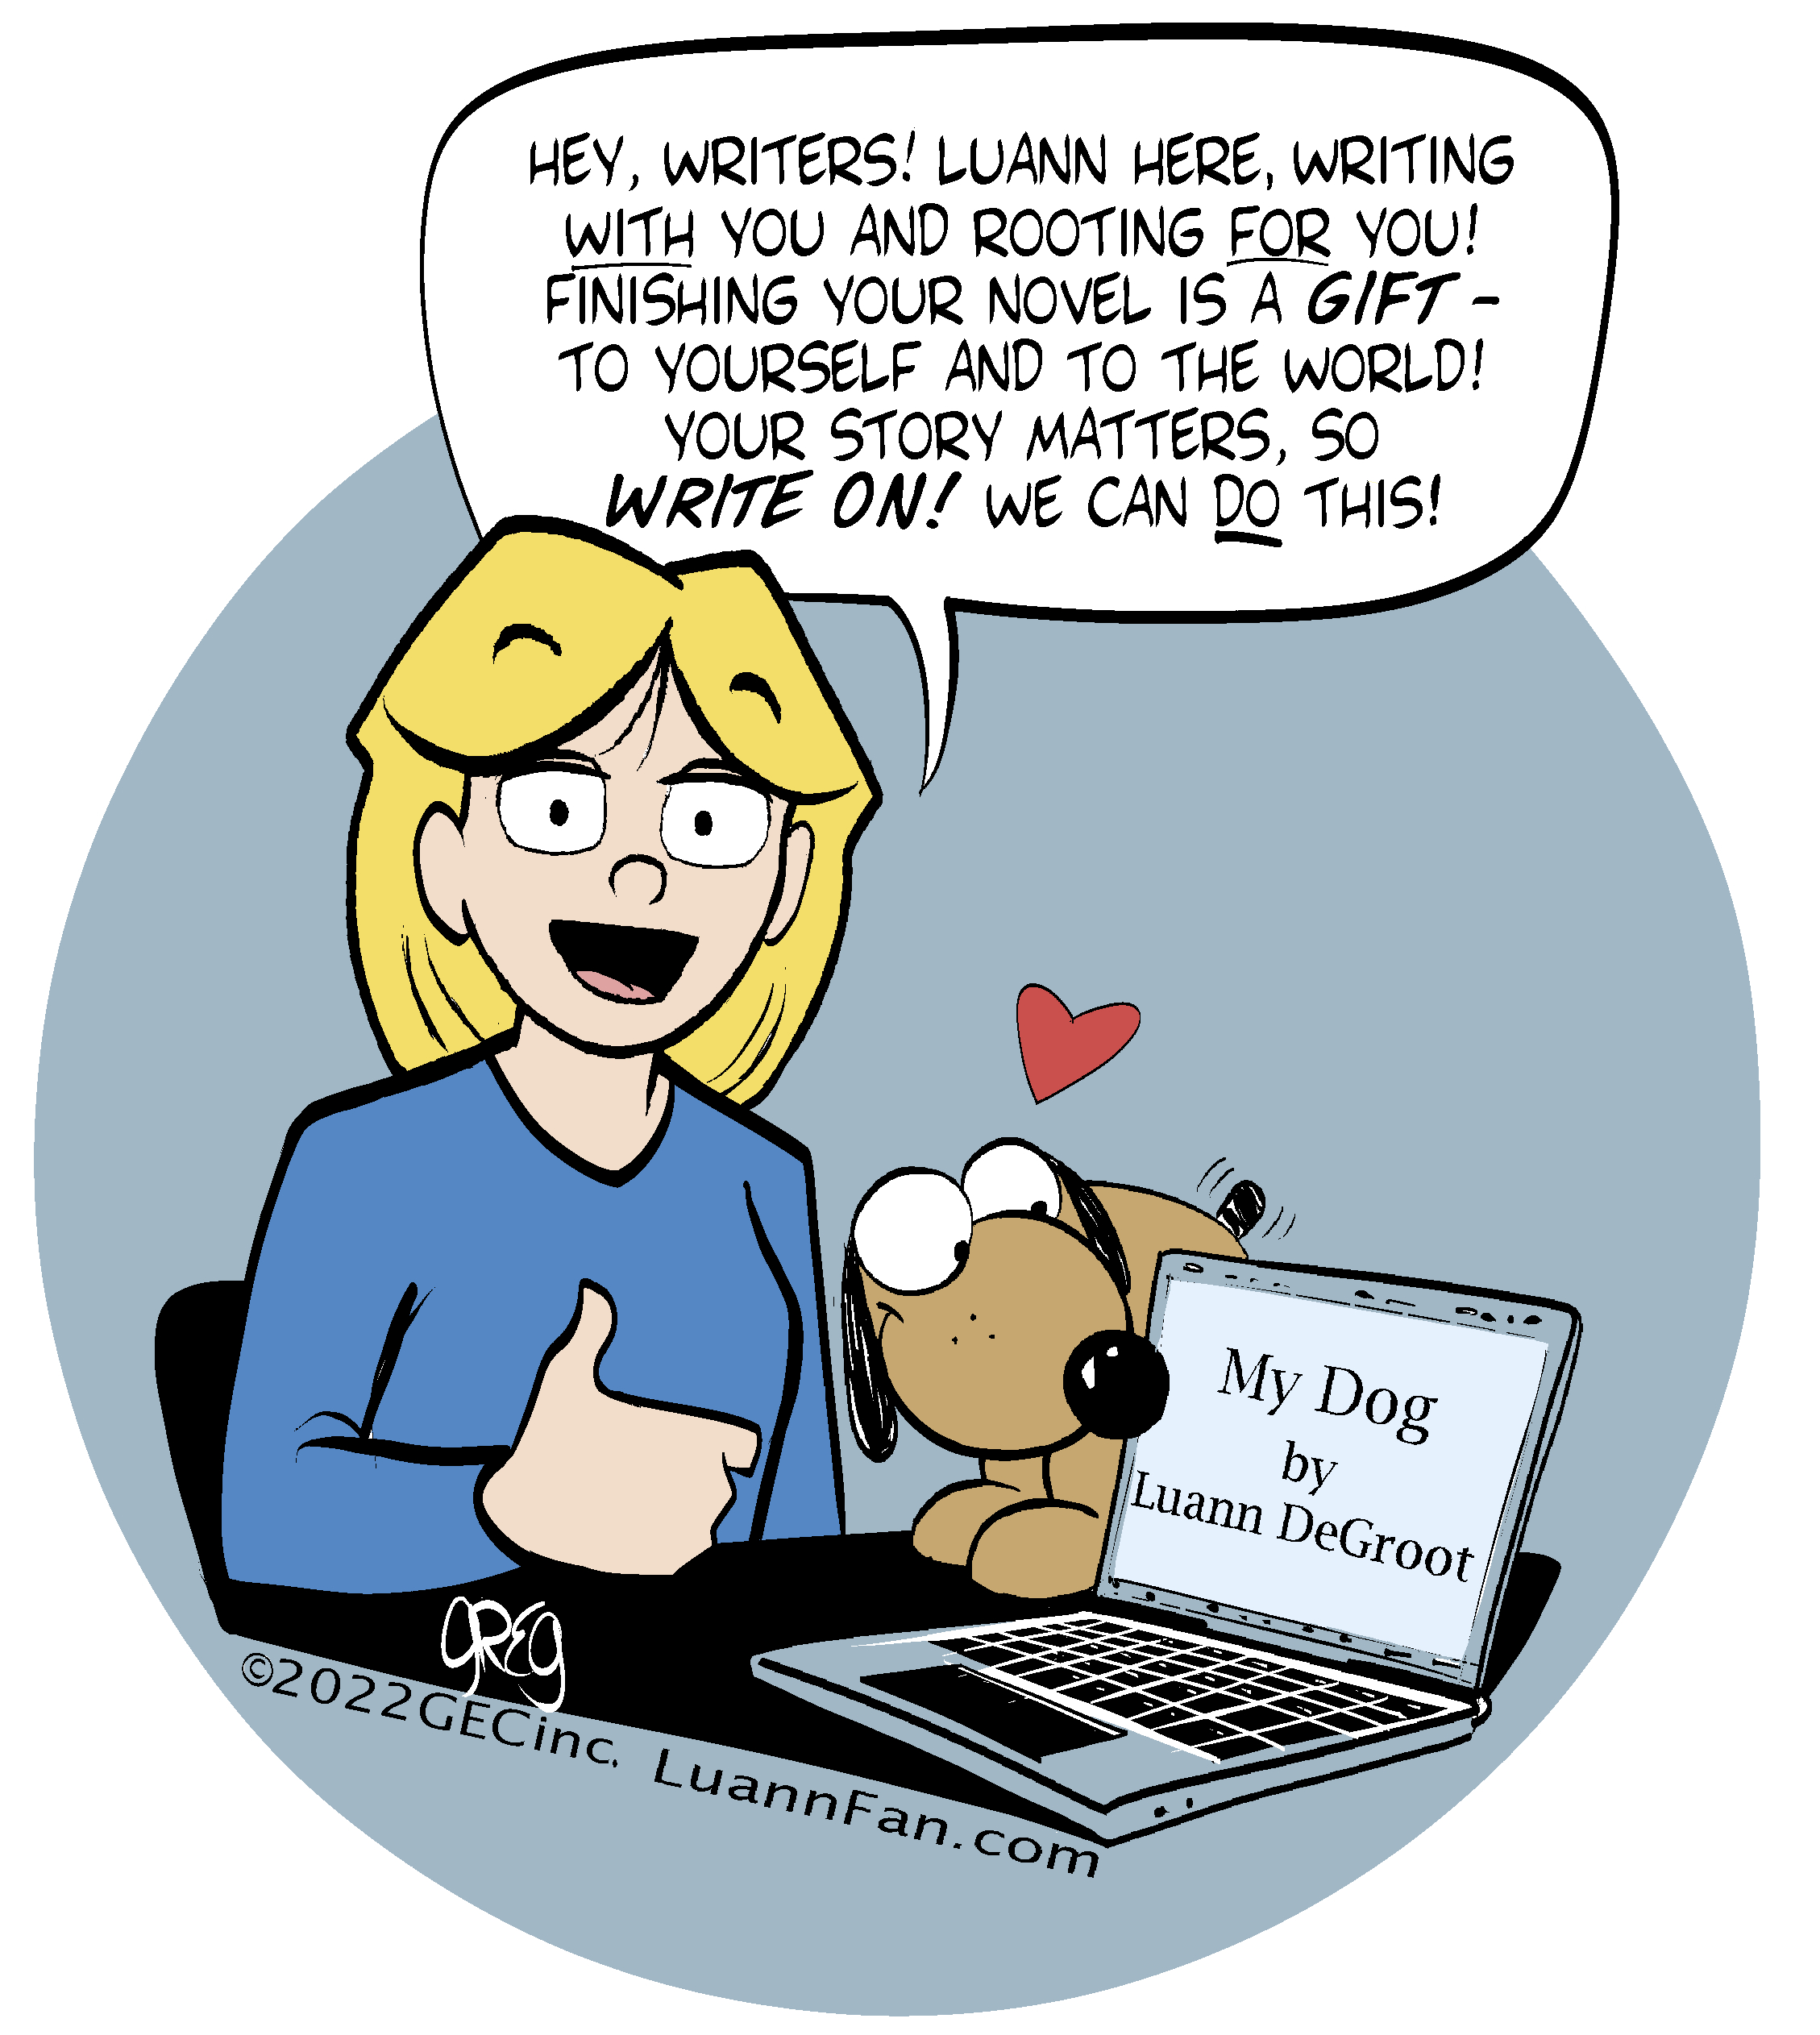 Comic strip character LUANN and her dog Puddles at a computer encouraging writers who are participating in NaNoWriMo